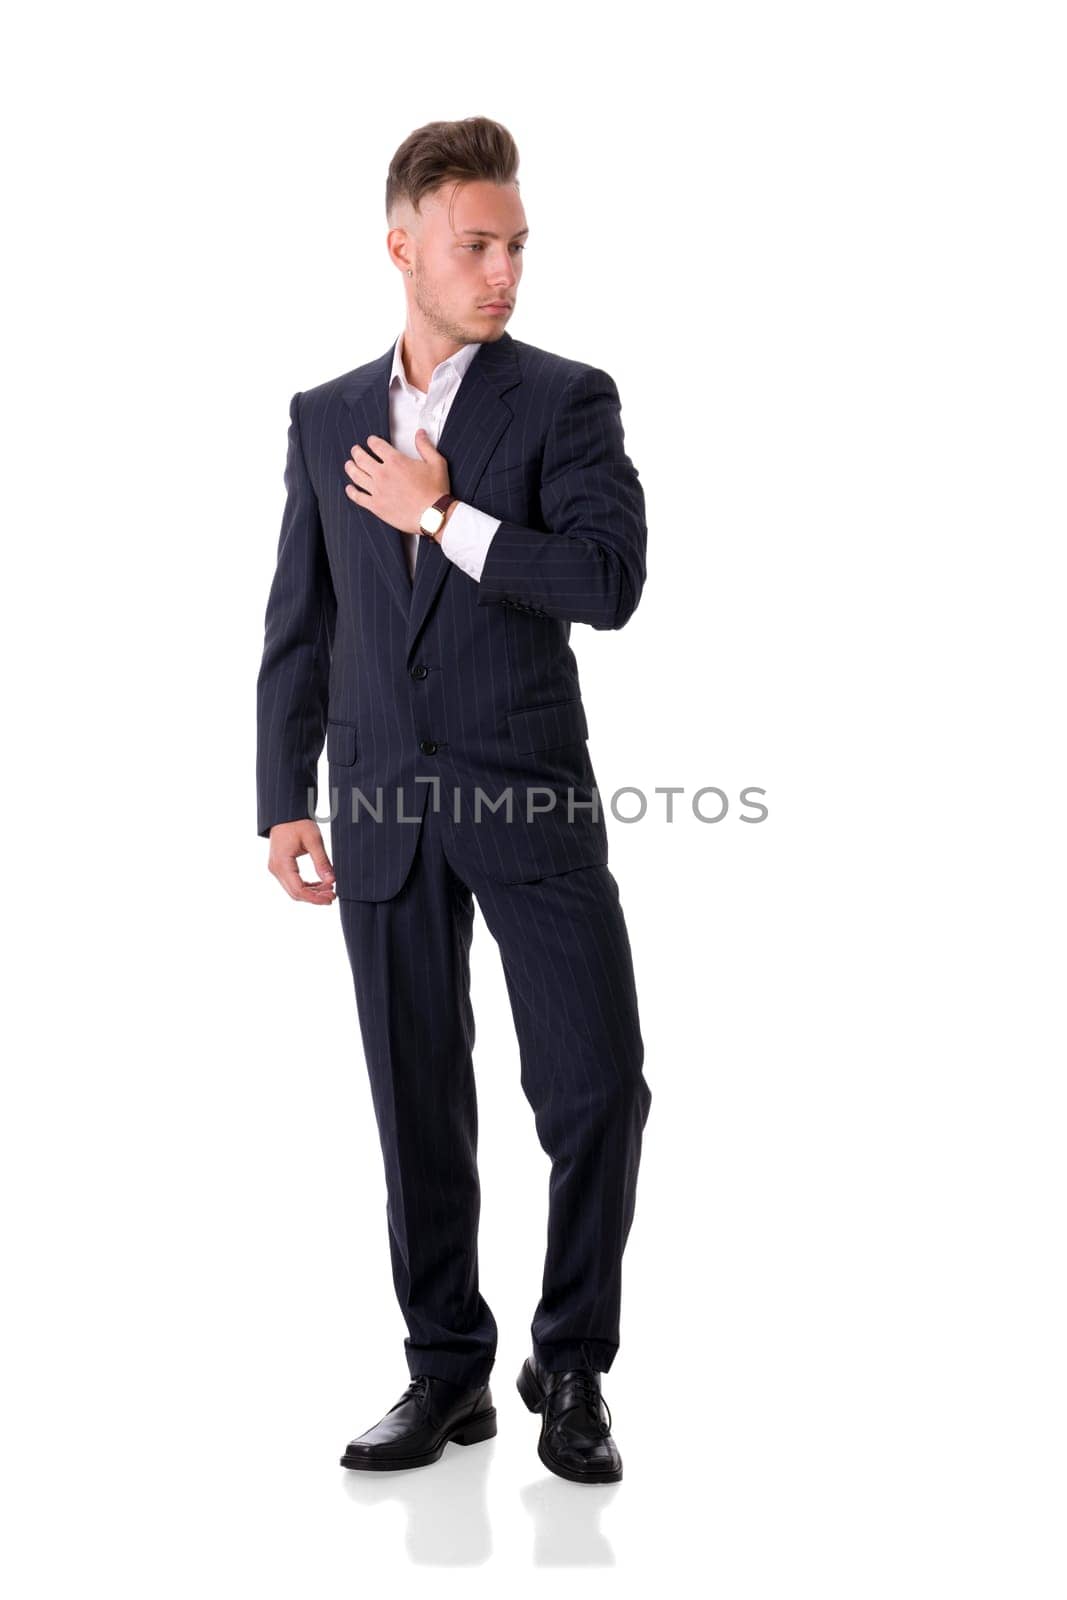 Man in a Suit and Tie Posing for a Picture by artofphoto